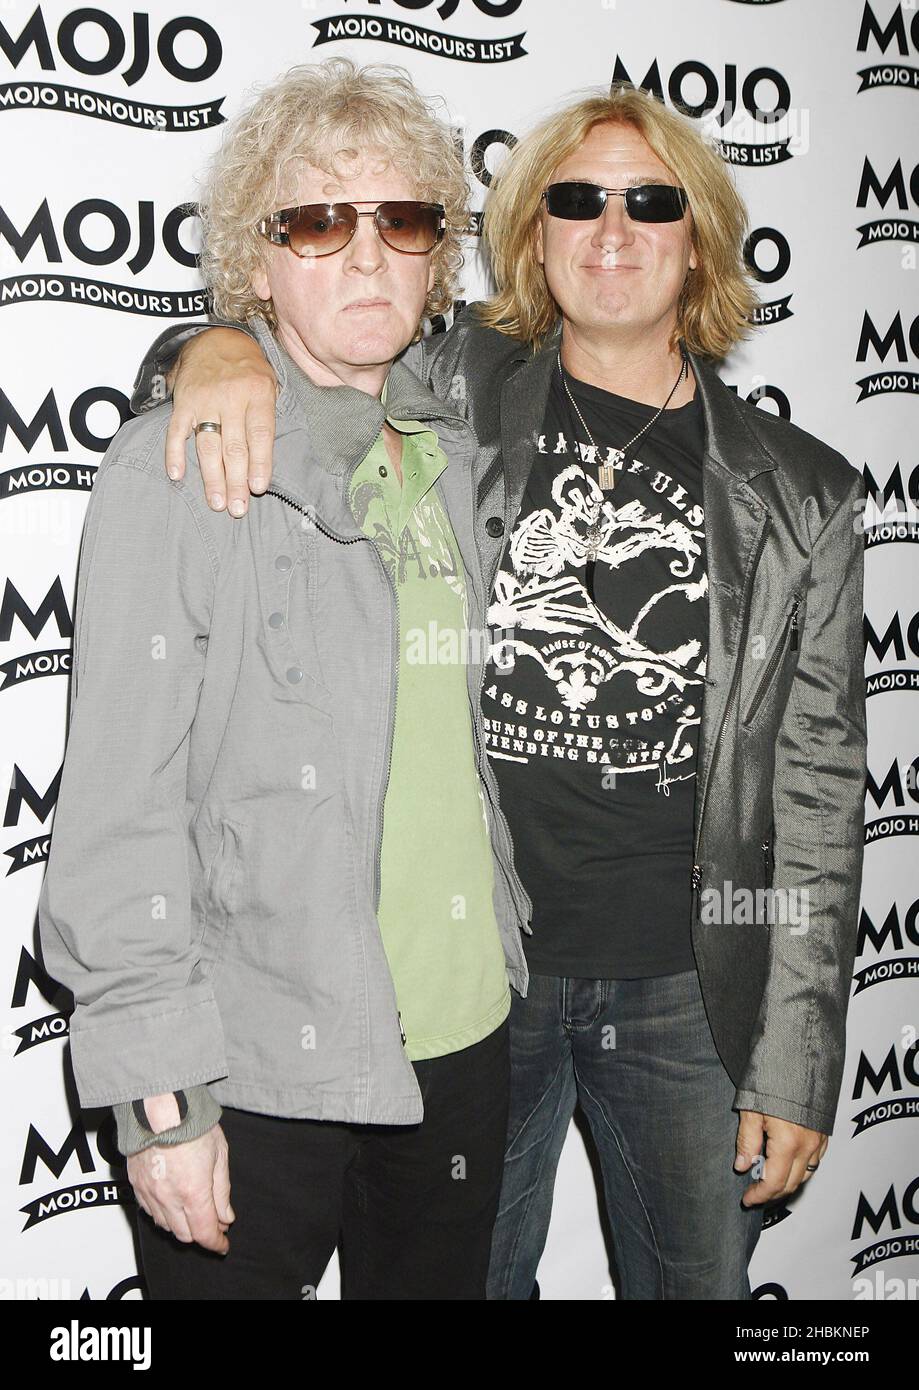 Ian Hunter of Mott The Hoople and Joe Elliot of Def Leppard at the MOJO Awards at The Brewery in London. Stock Photo